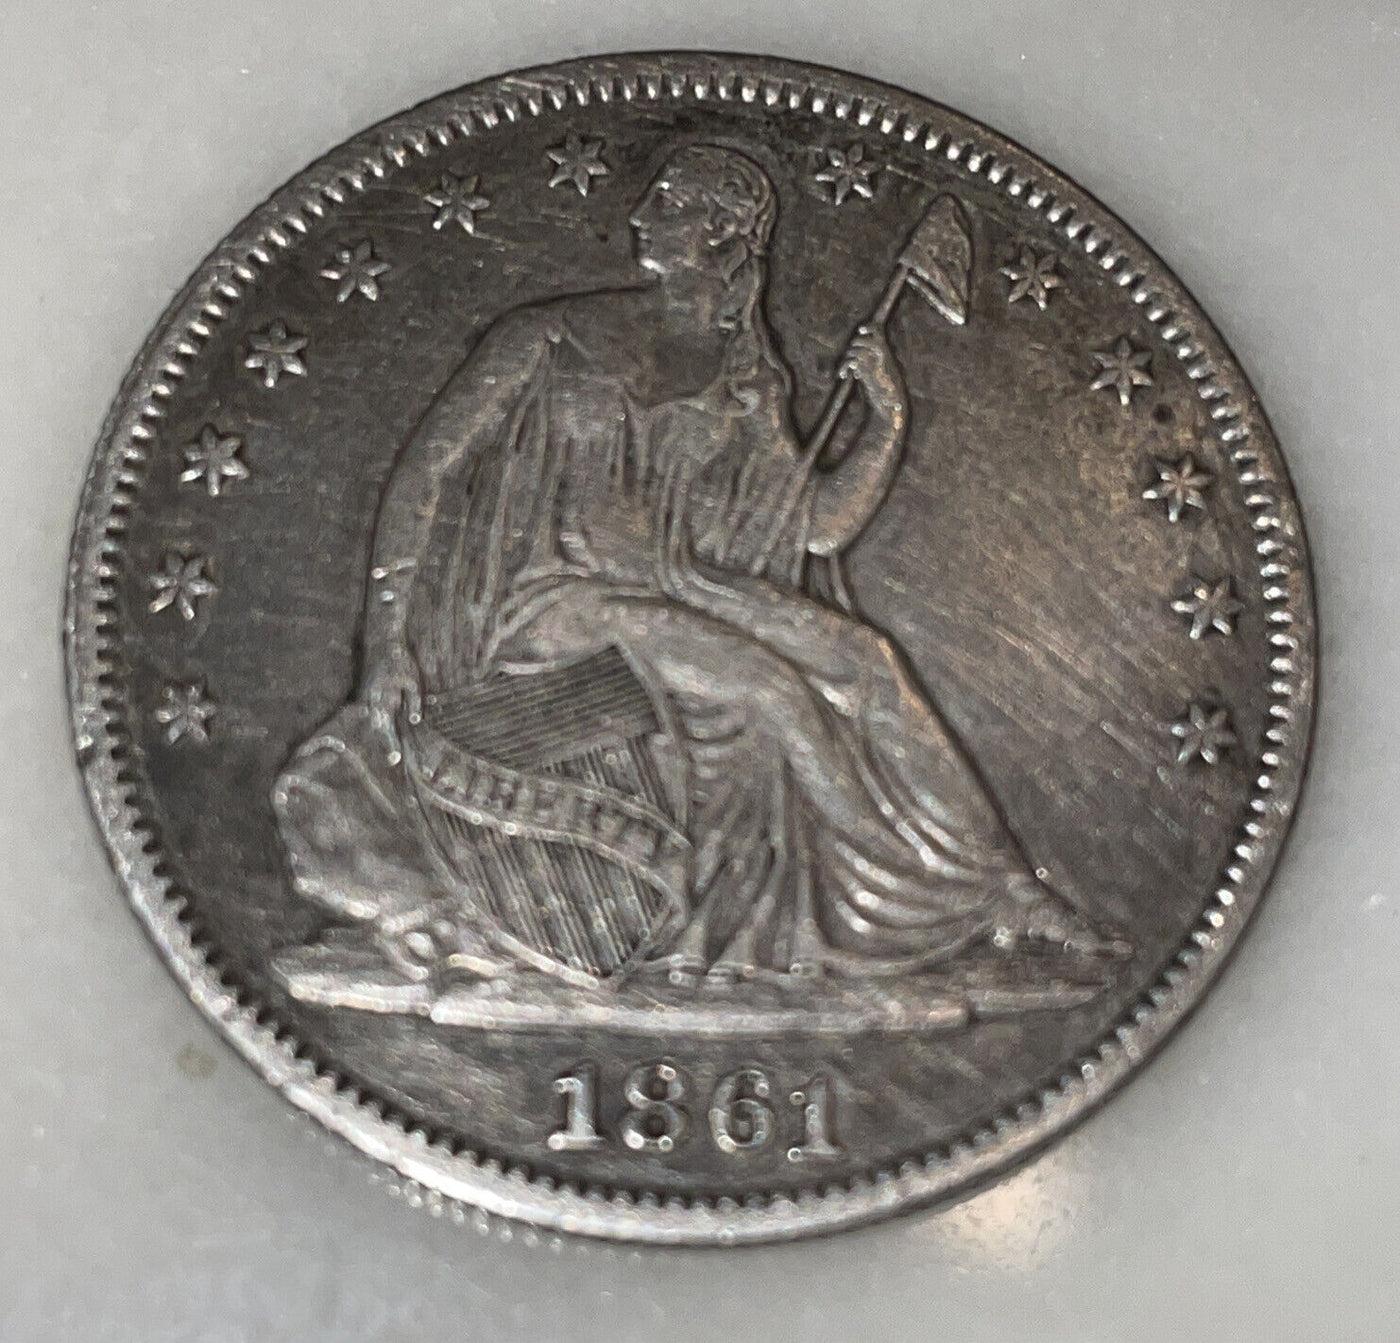 1861 seated silver half $ great features choice extra fine better date coin